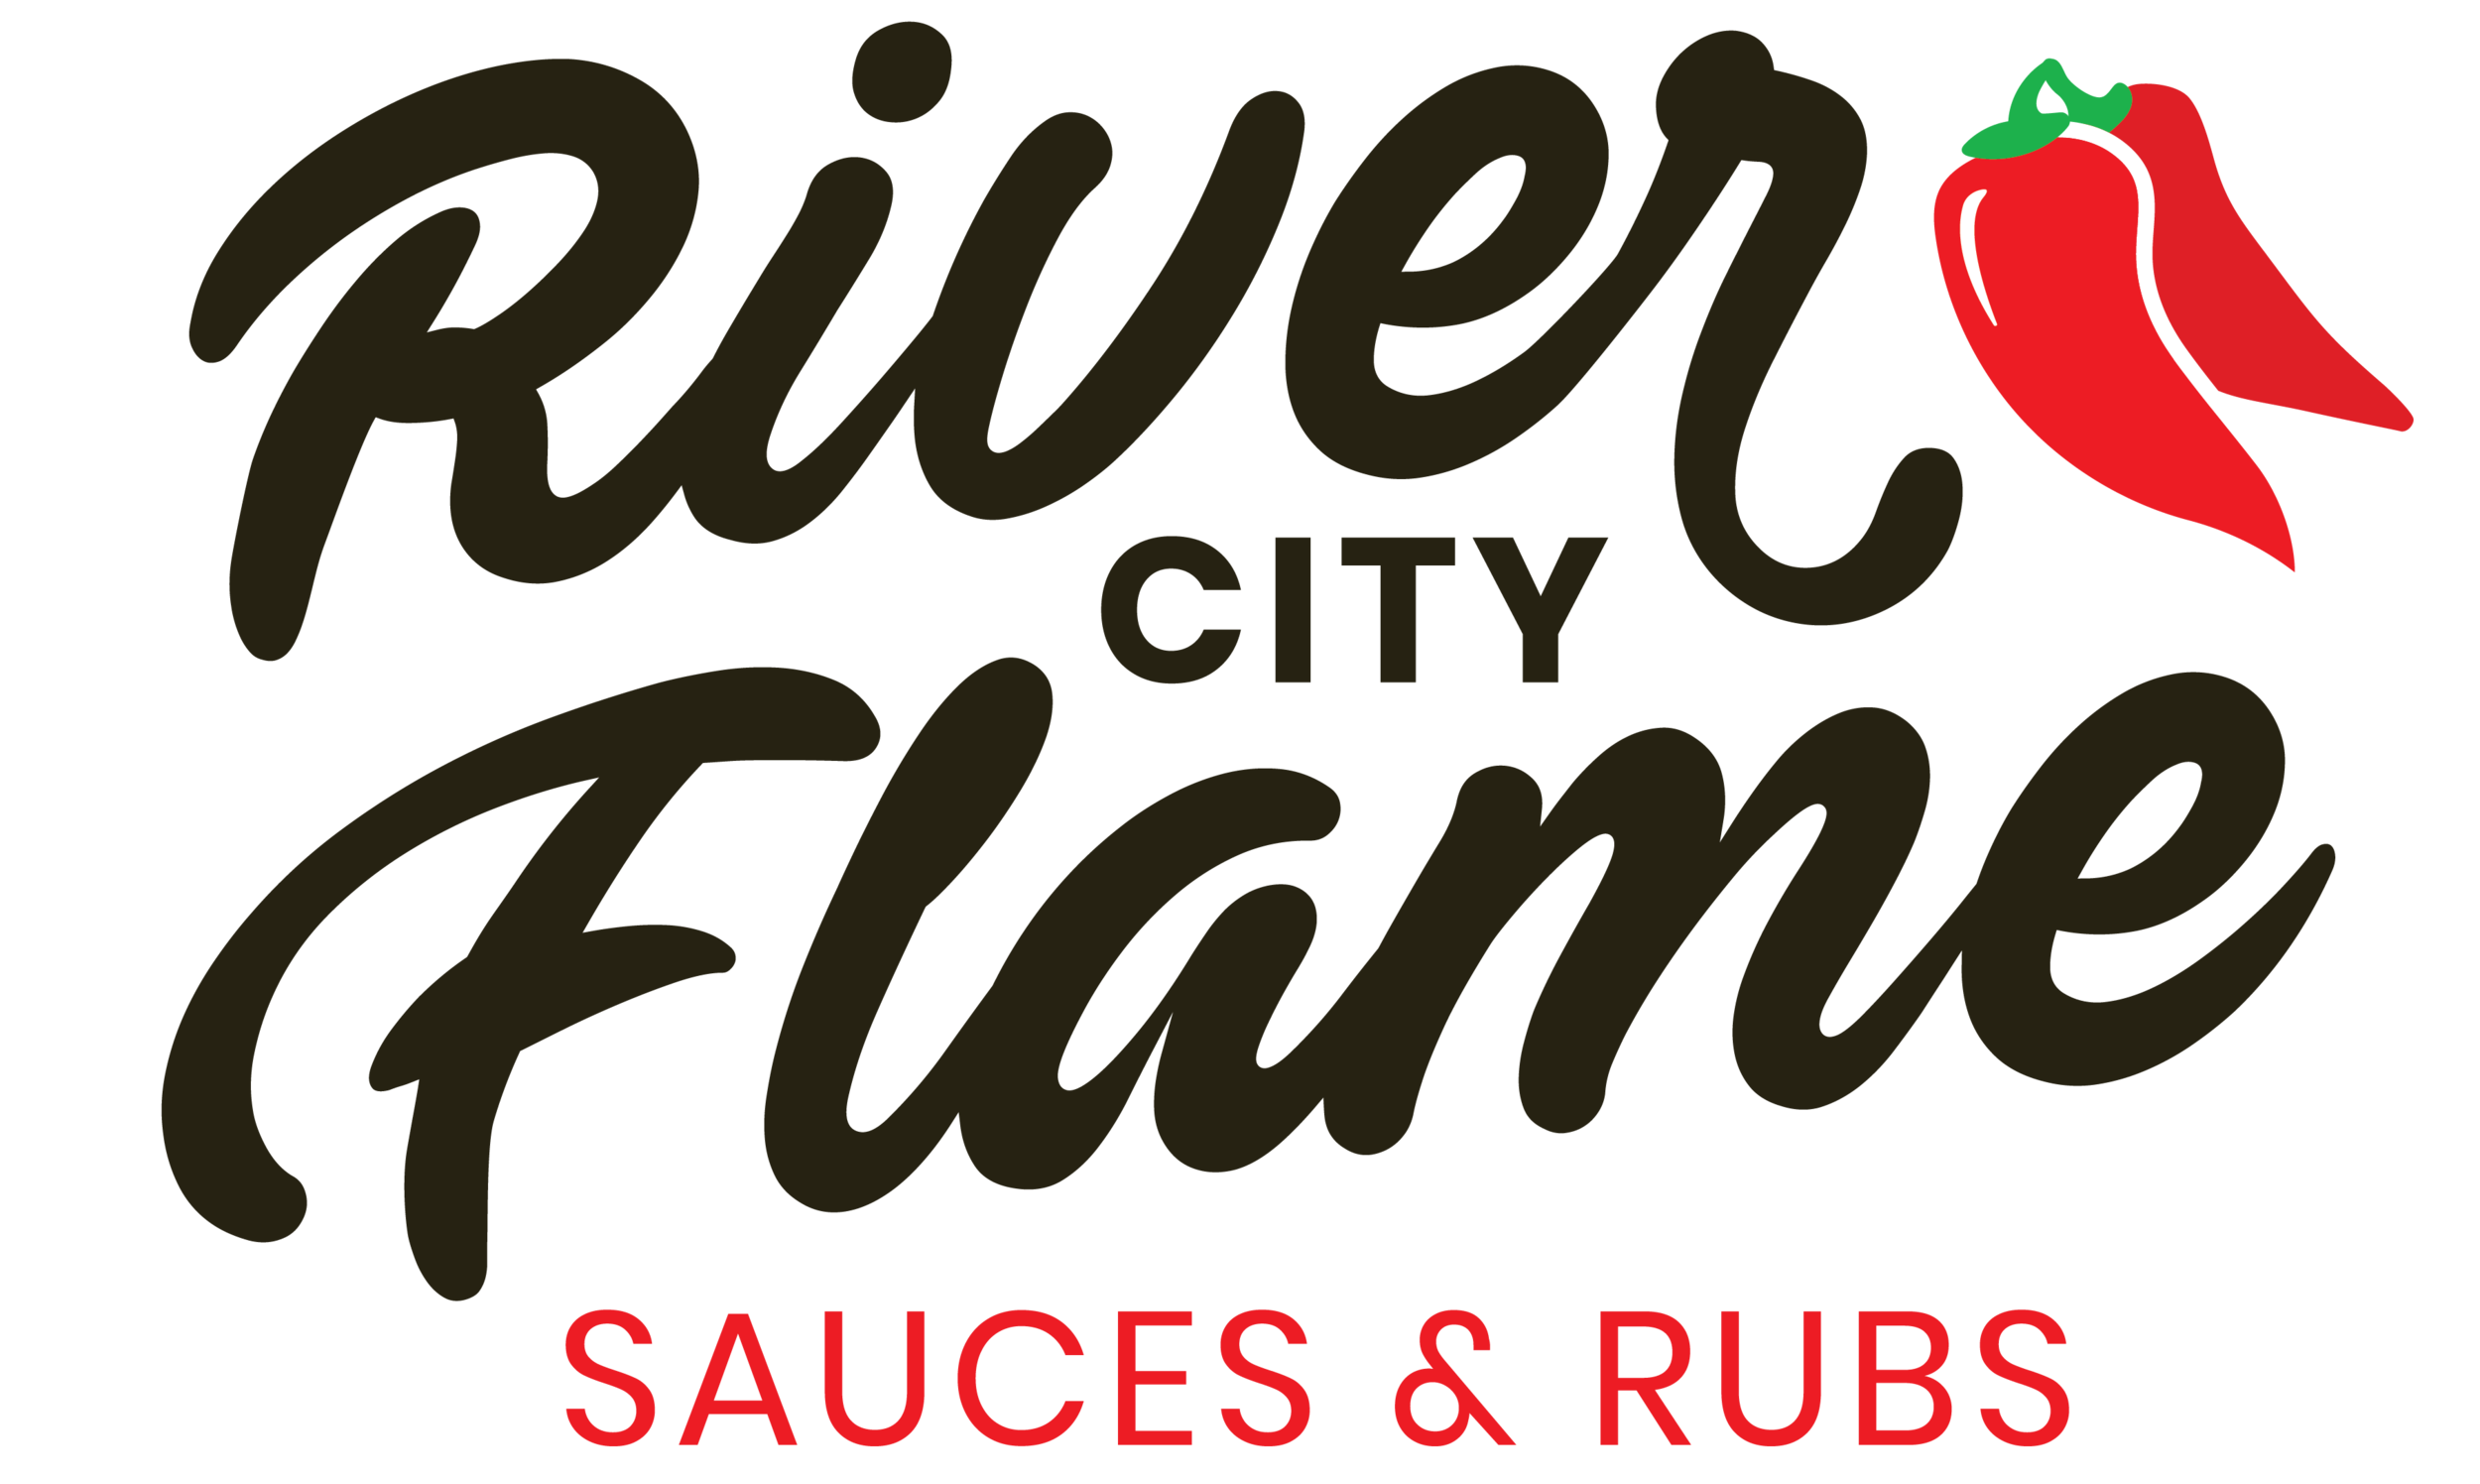 River City Flame